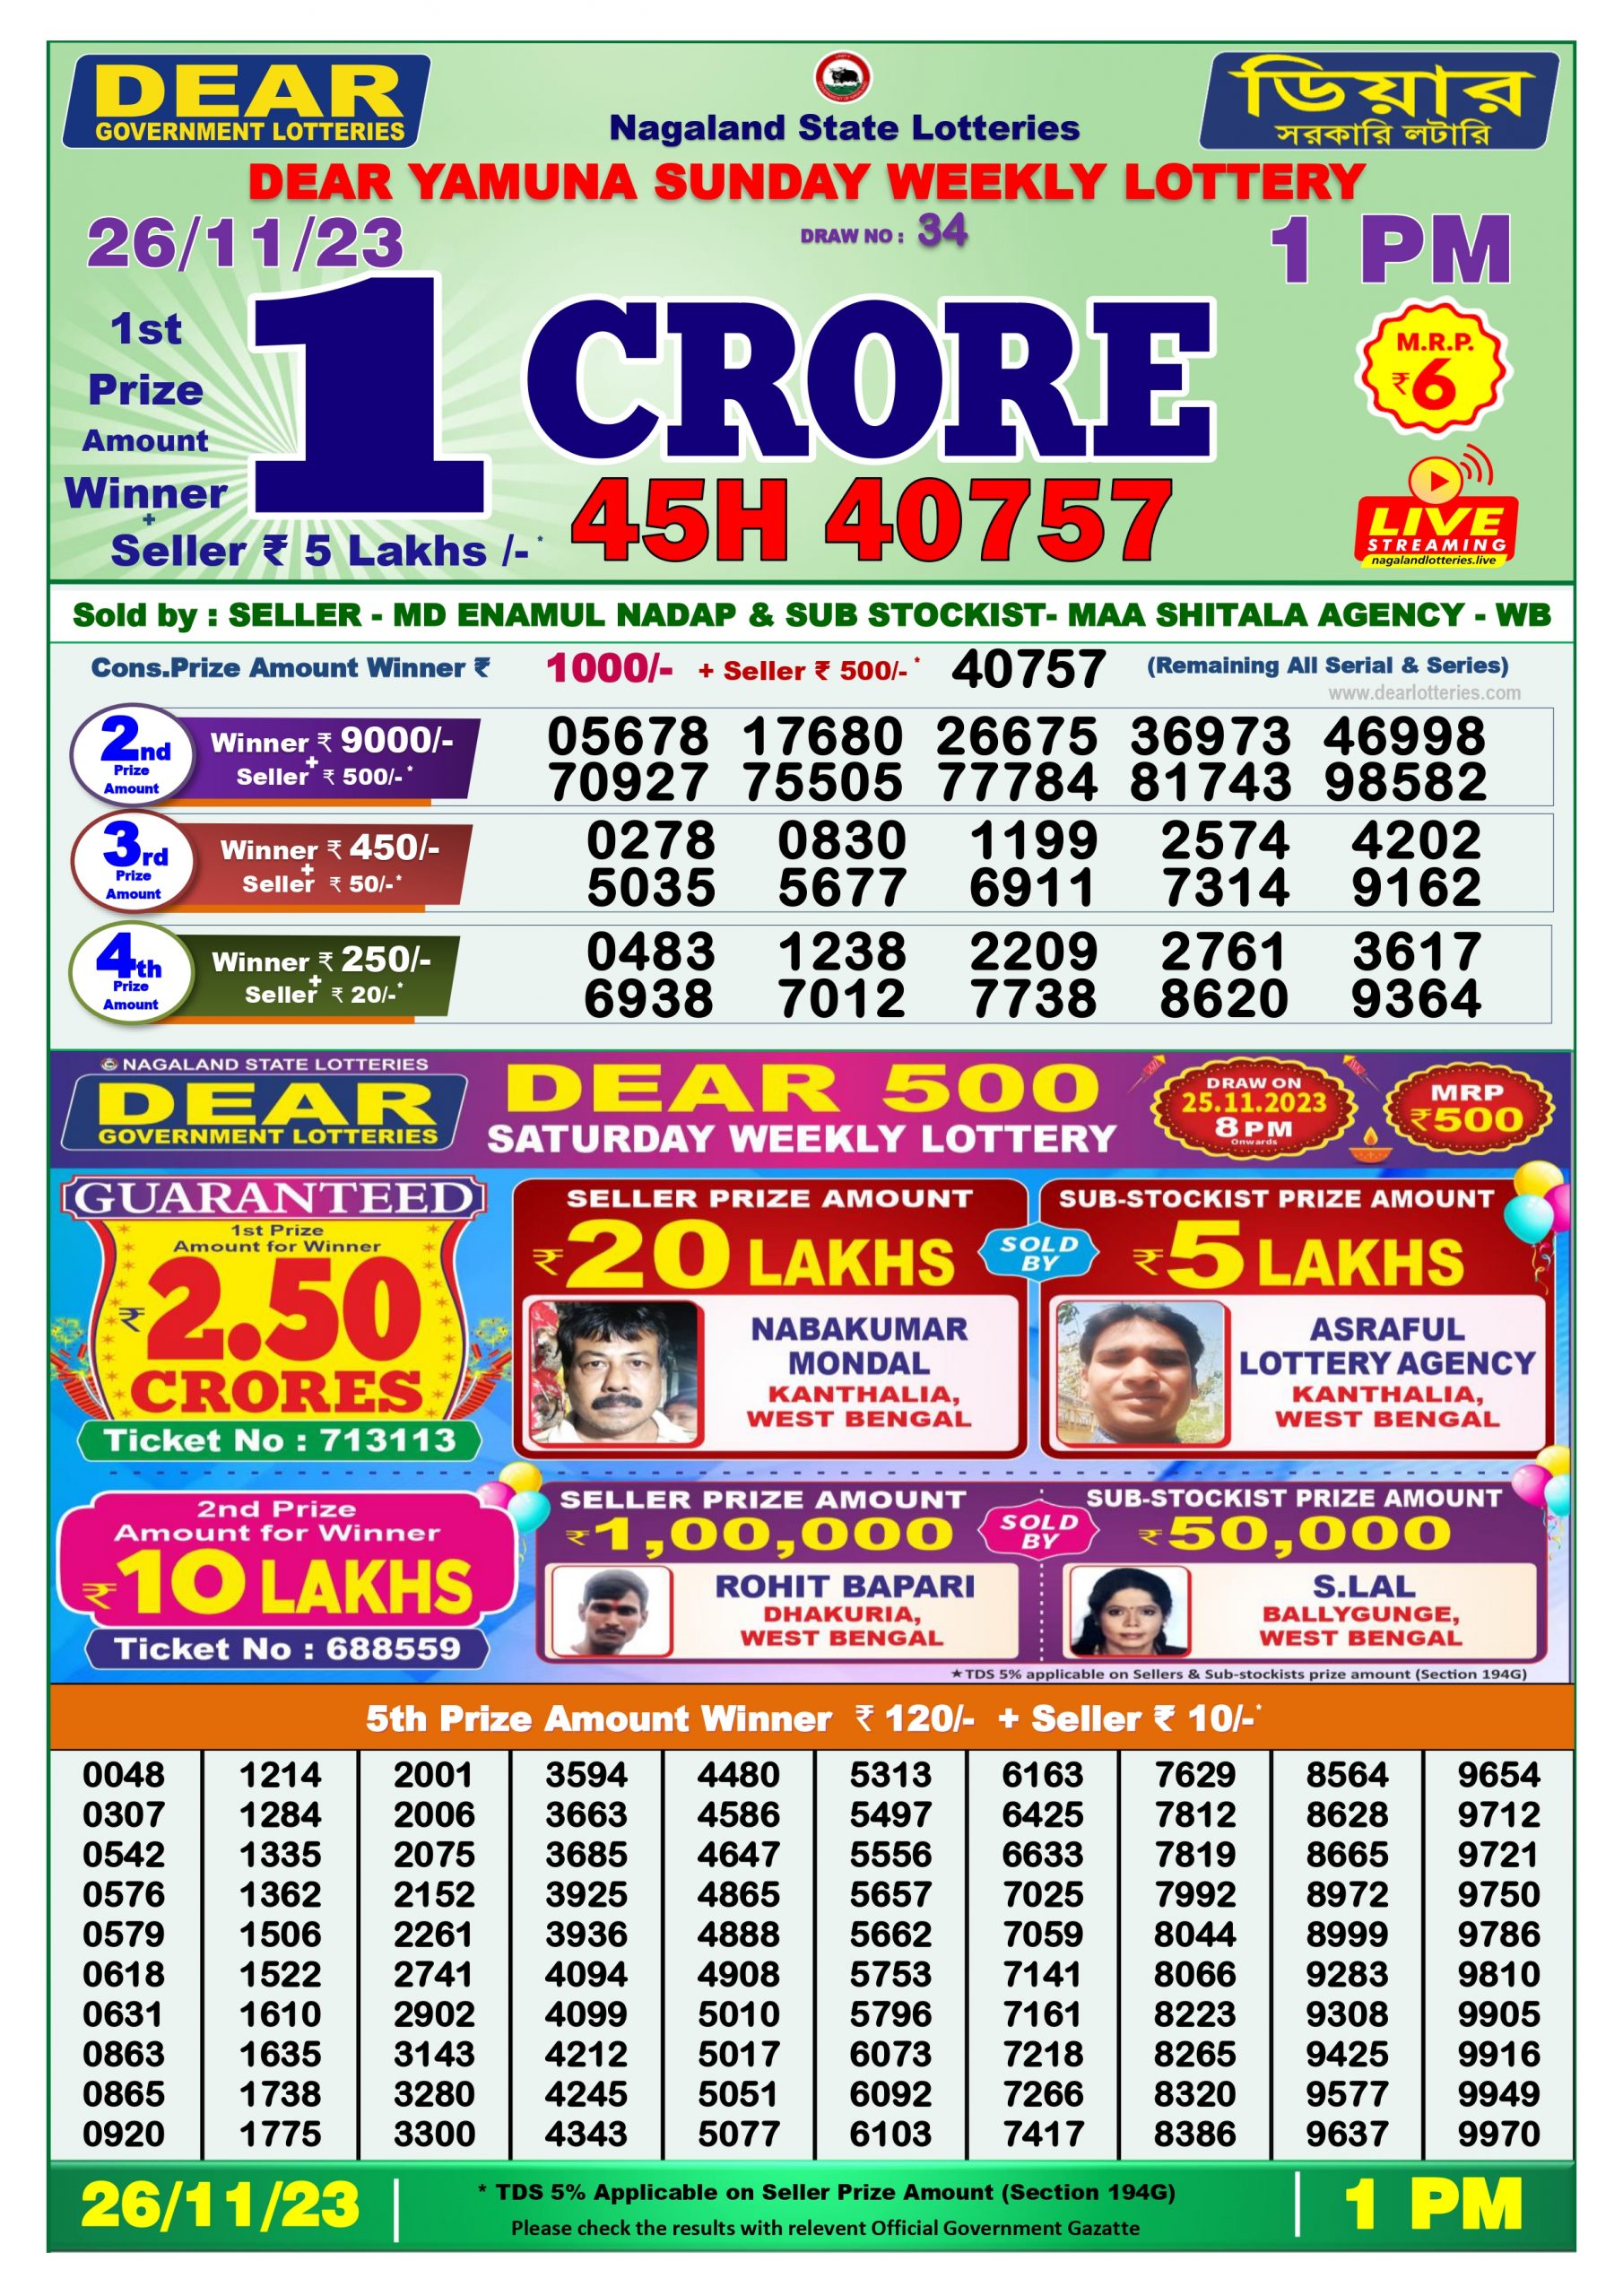 Sri Lakshmi Lottery Result: How to Check and Claim Your Prize -  rajkotupdates.com